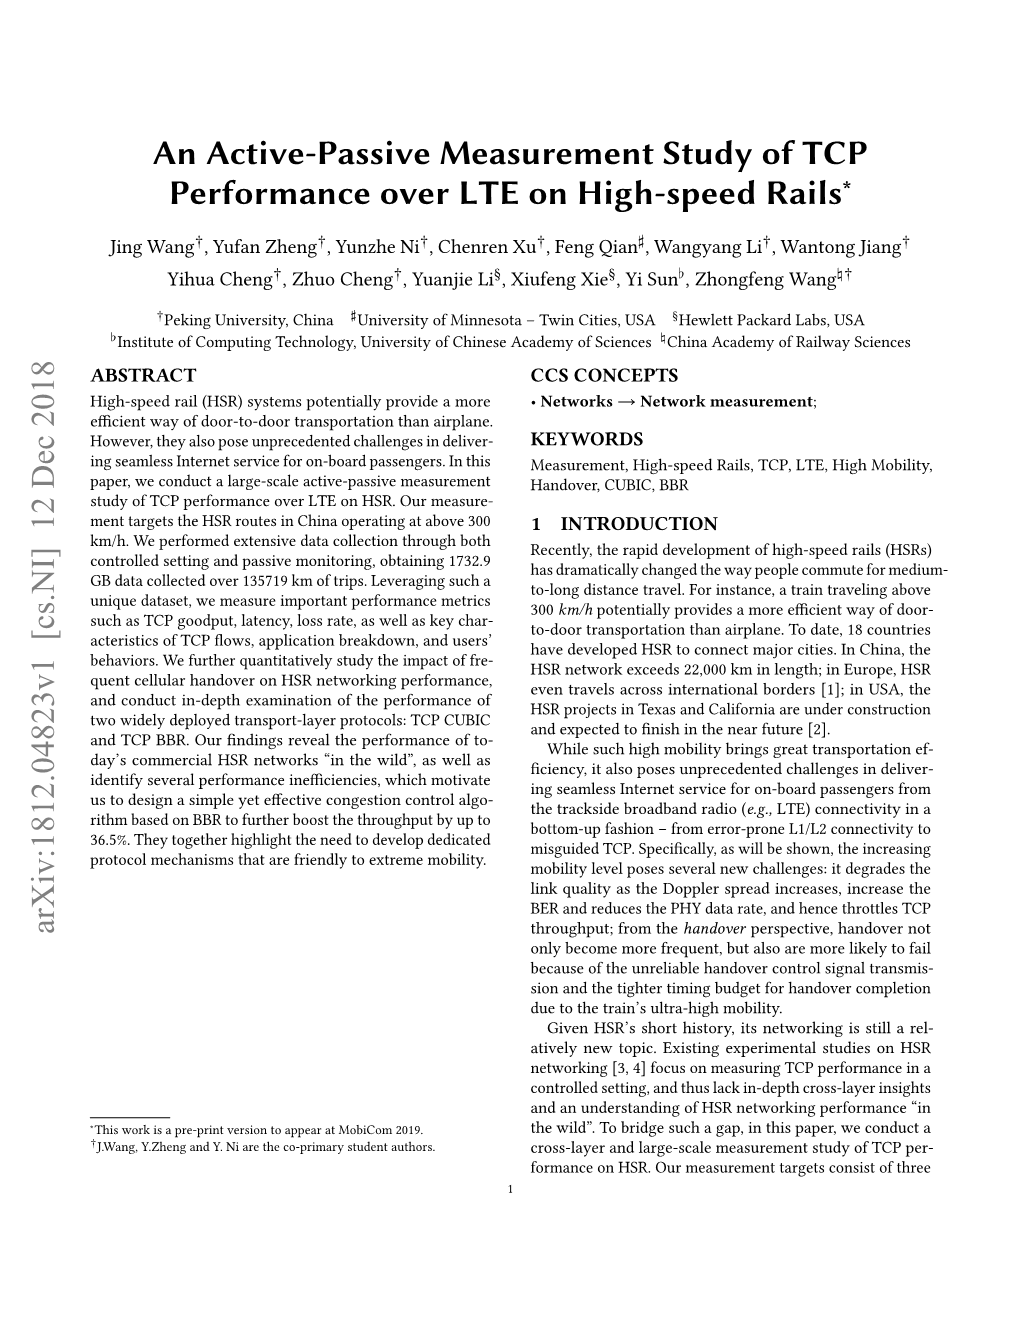 An Active-Passive Measurement Study of TCP Performance Over LTE on High-Speed Rails∗